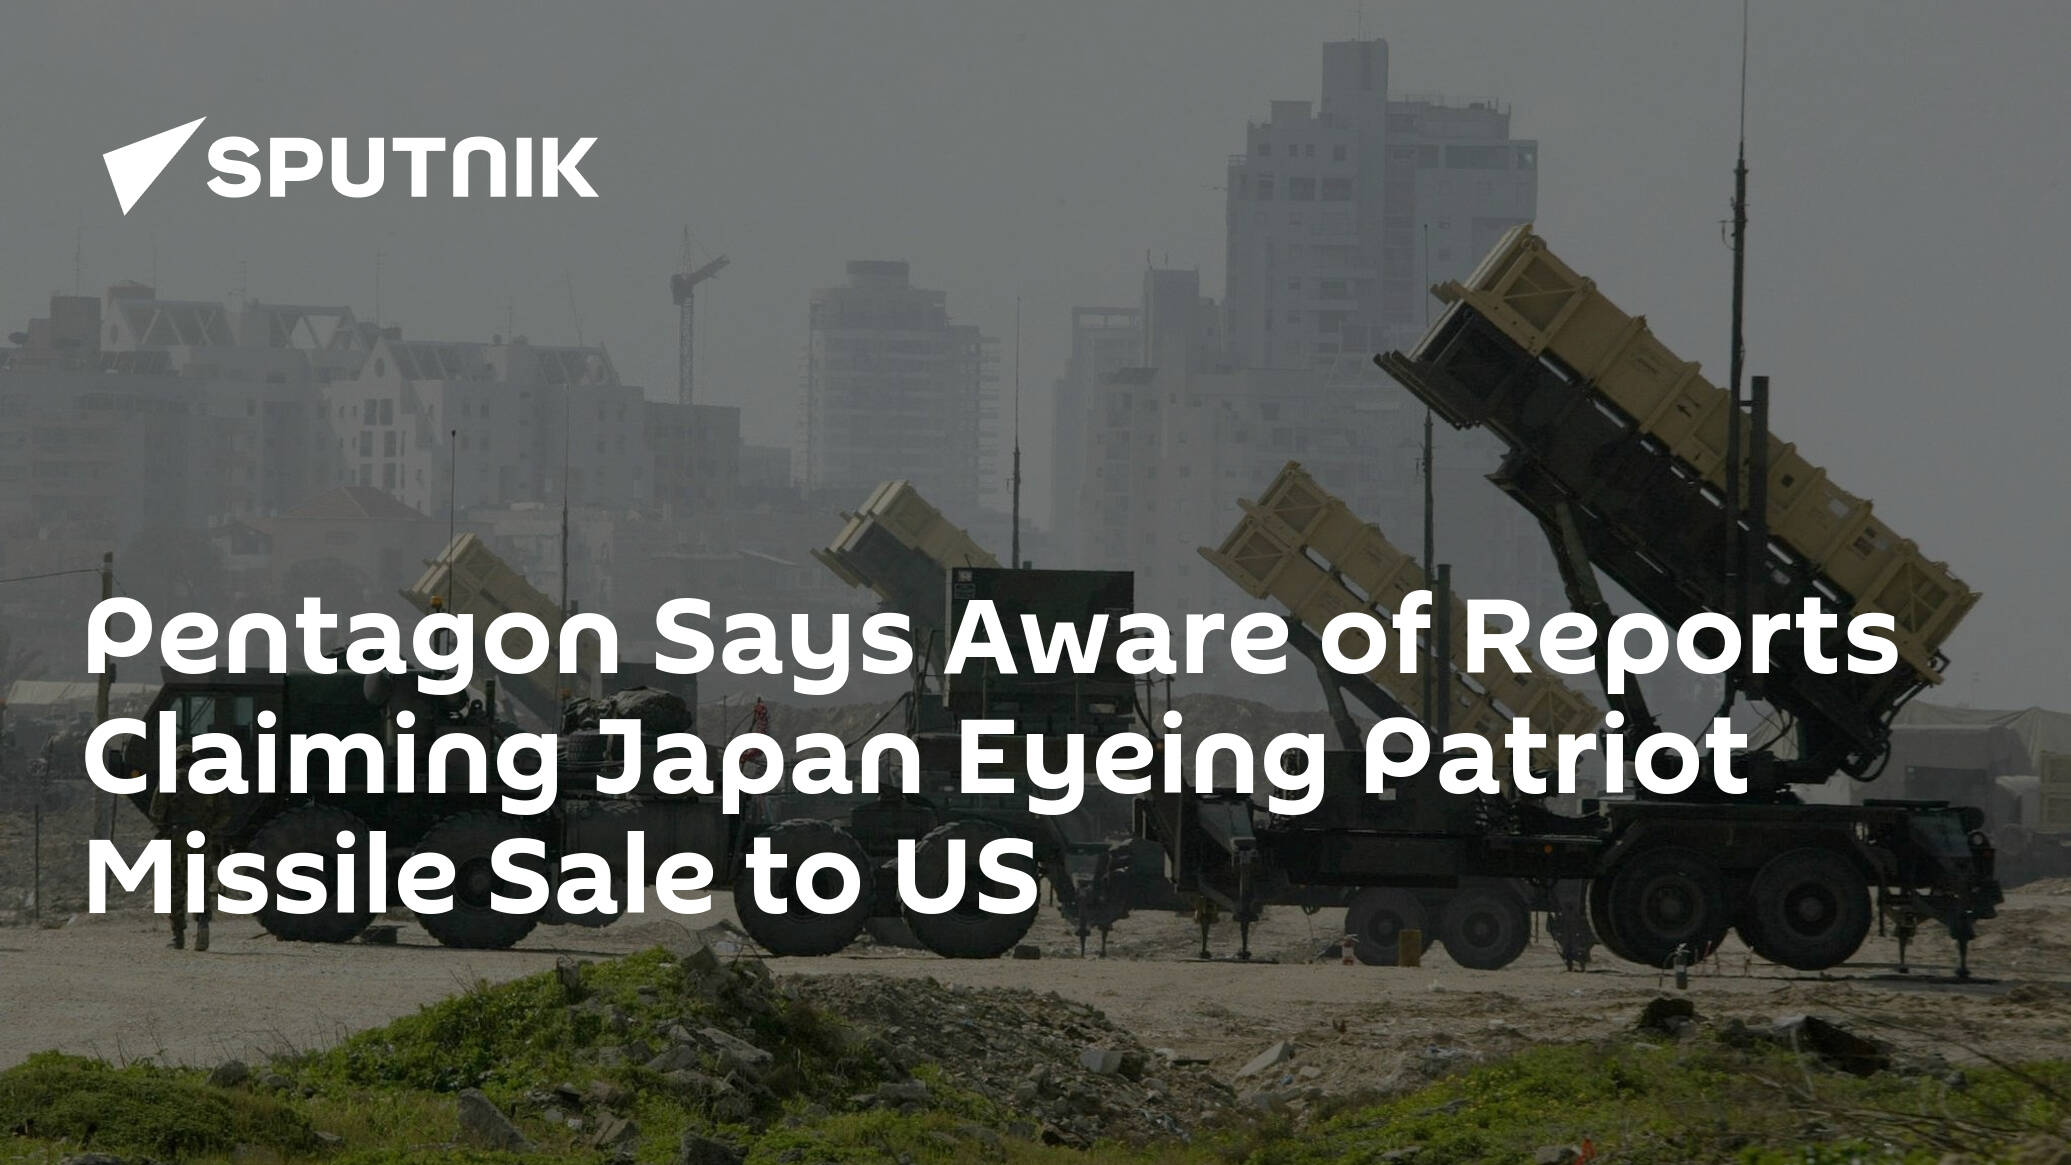 Pentagon Says Aware of Reports Claiming Japan Eyeing Patriot Missile Sale to US